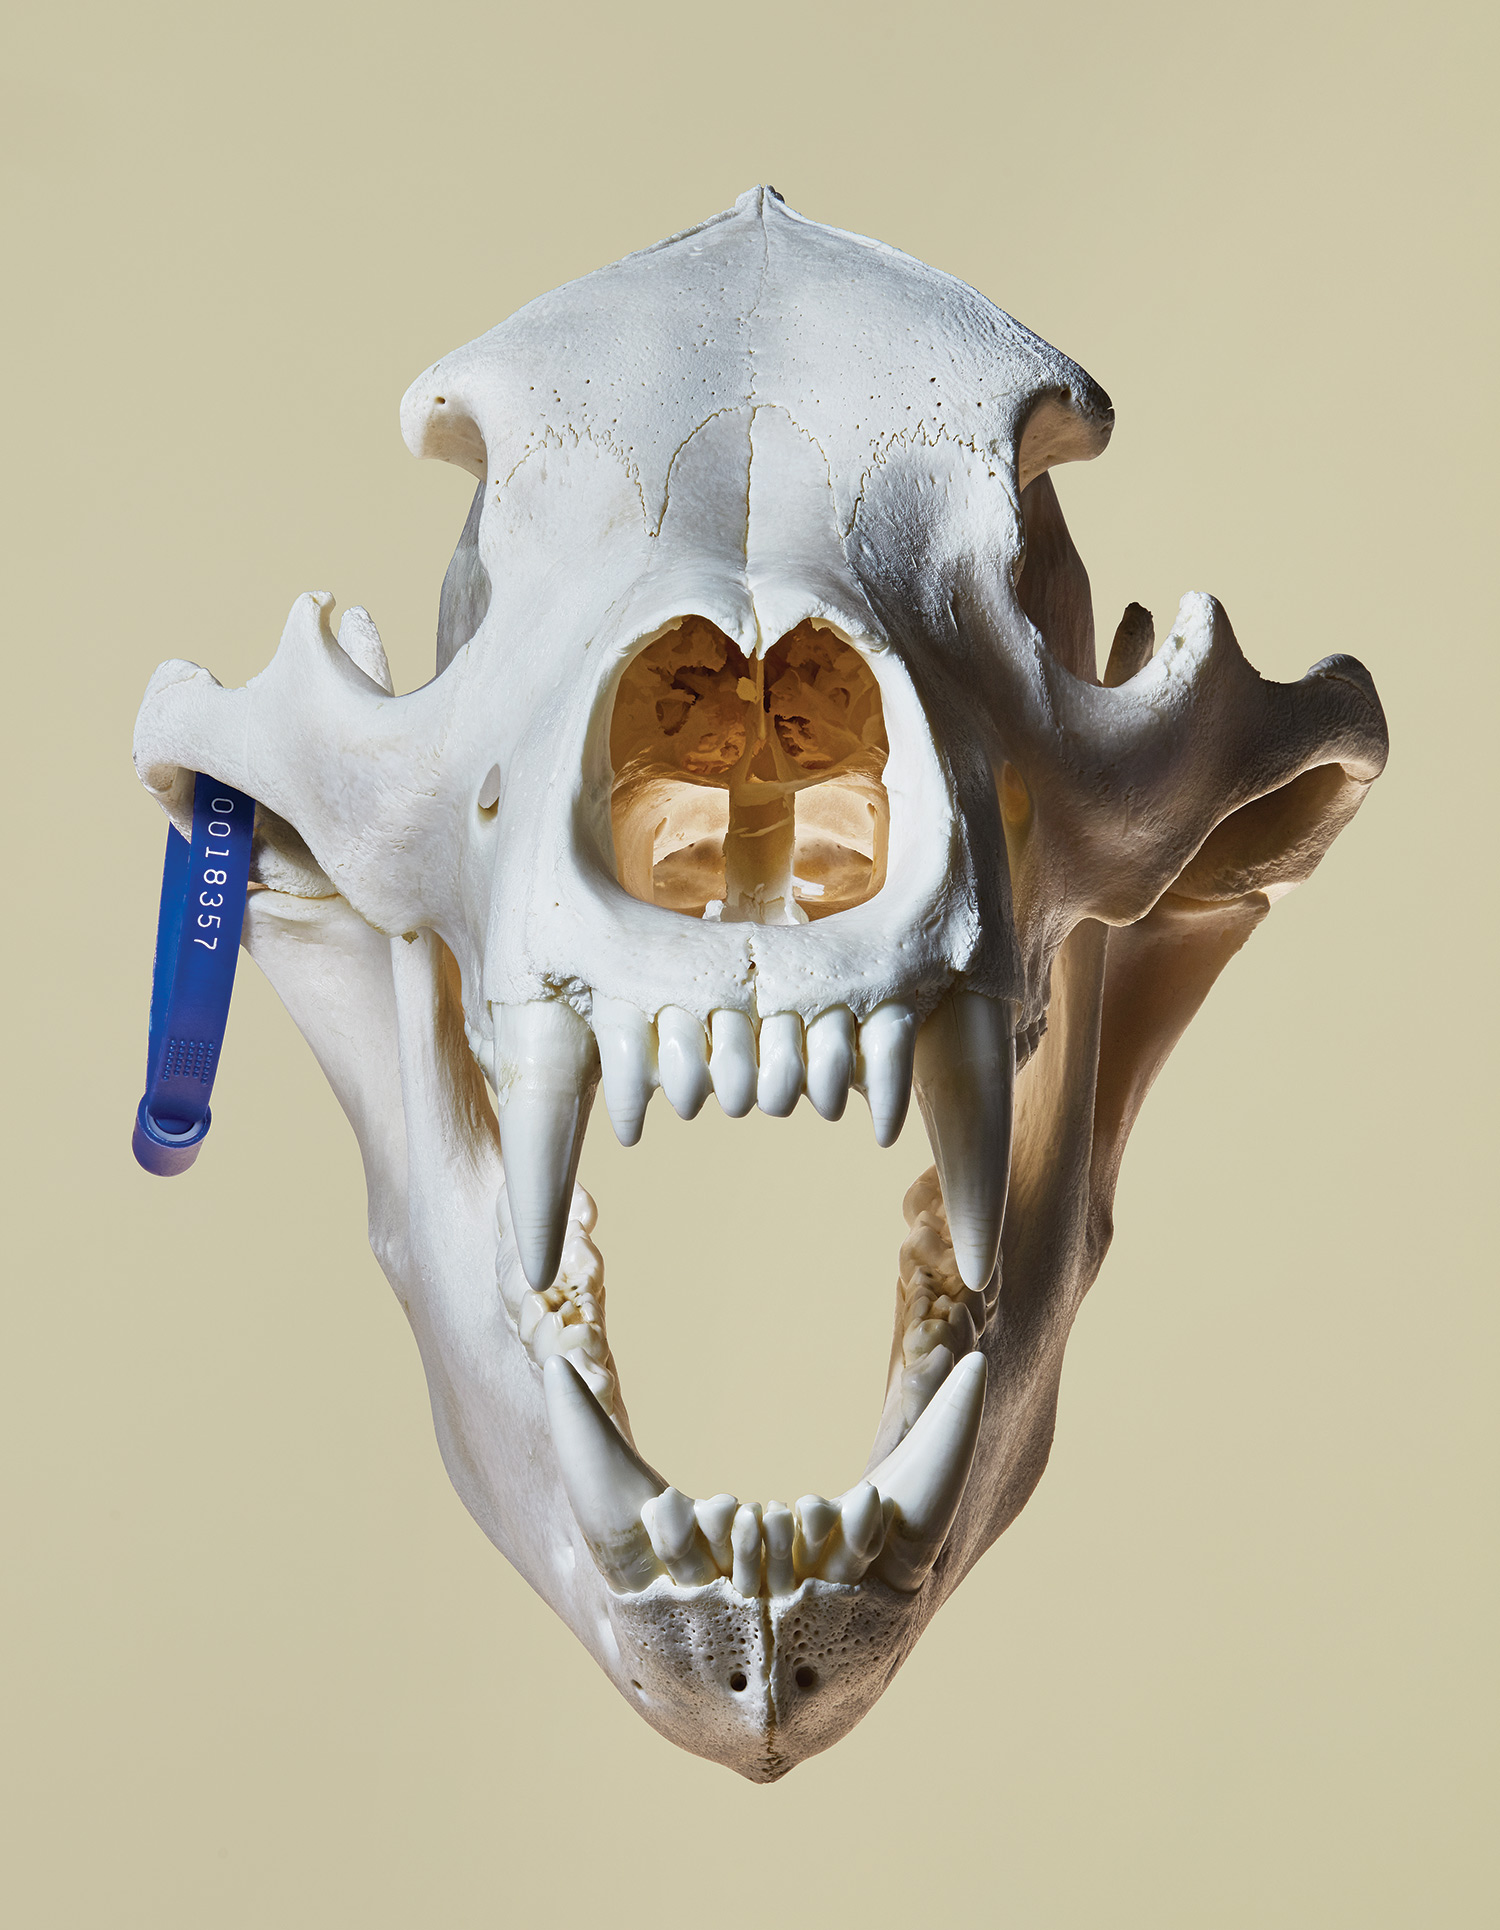 clean grizzly bear skull with blue tag attached to upper jaw